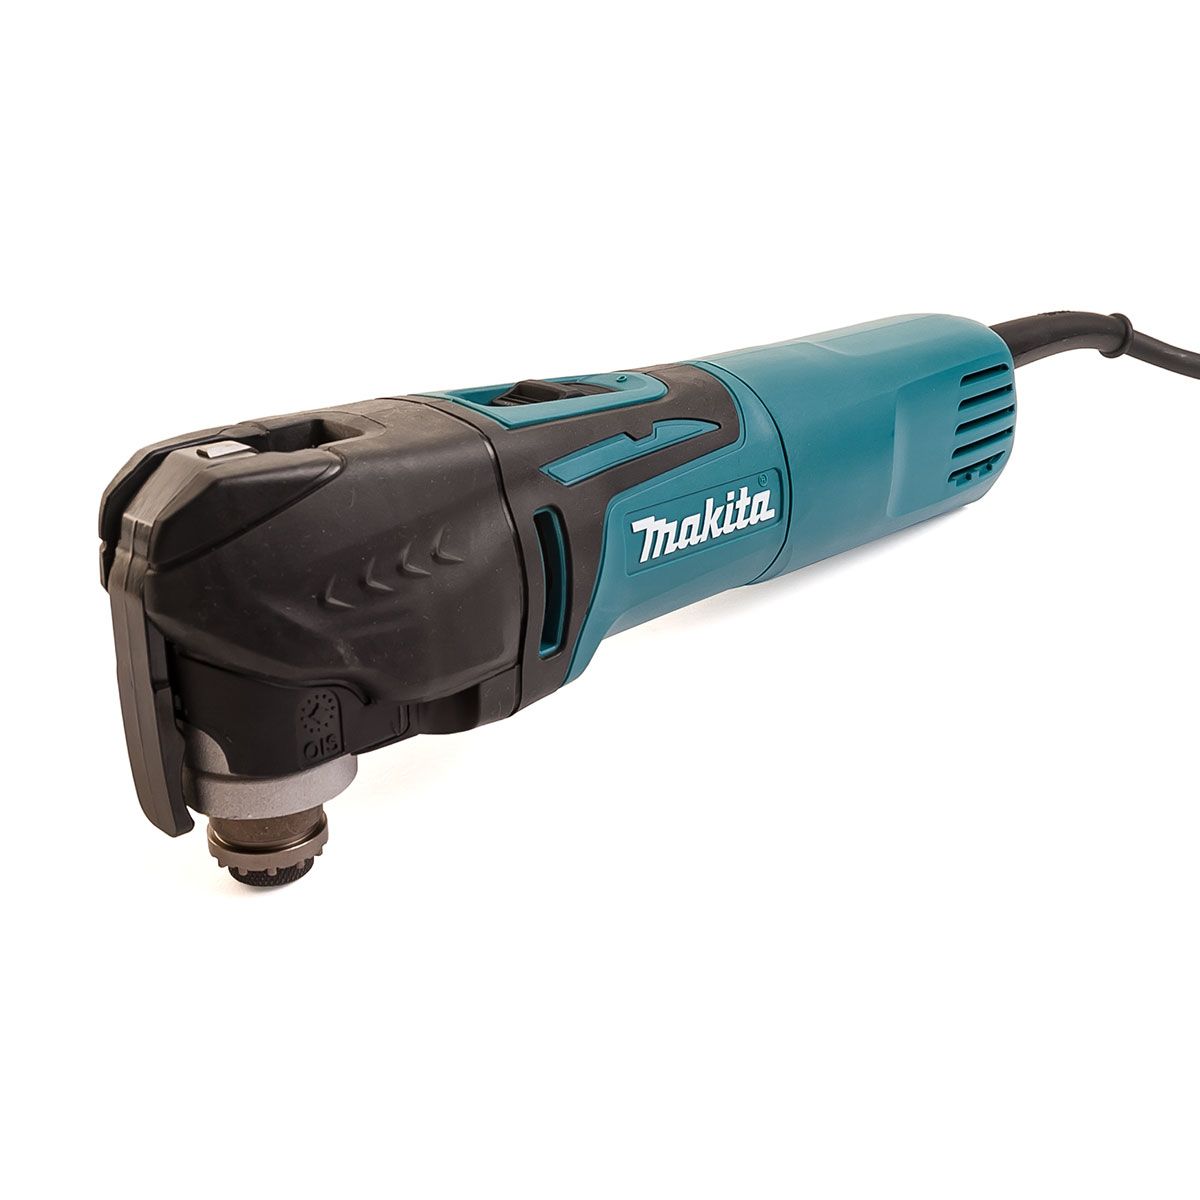 Makita Ois Quick Change Multi Tool In Case 240v MAKTM3010CK | The soft start facility allows you to place the blade accurately on the work piece and avoids the blade skipping around for a more precise cut. | toolforce.ie